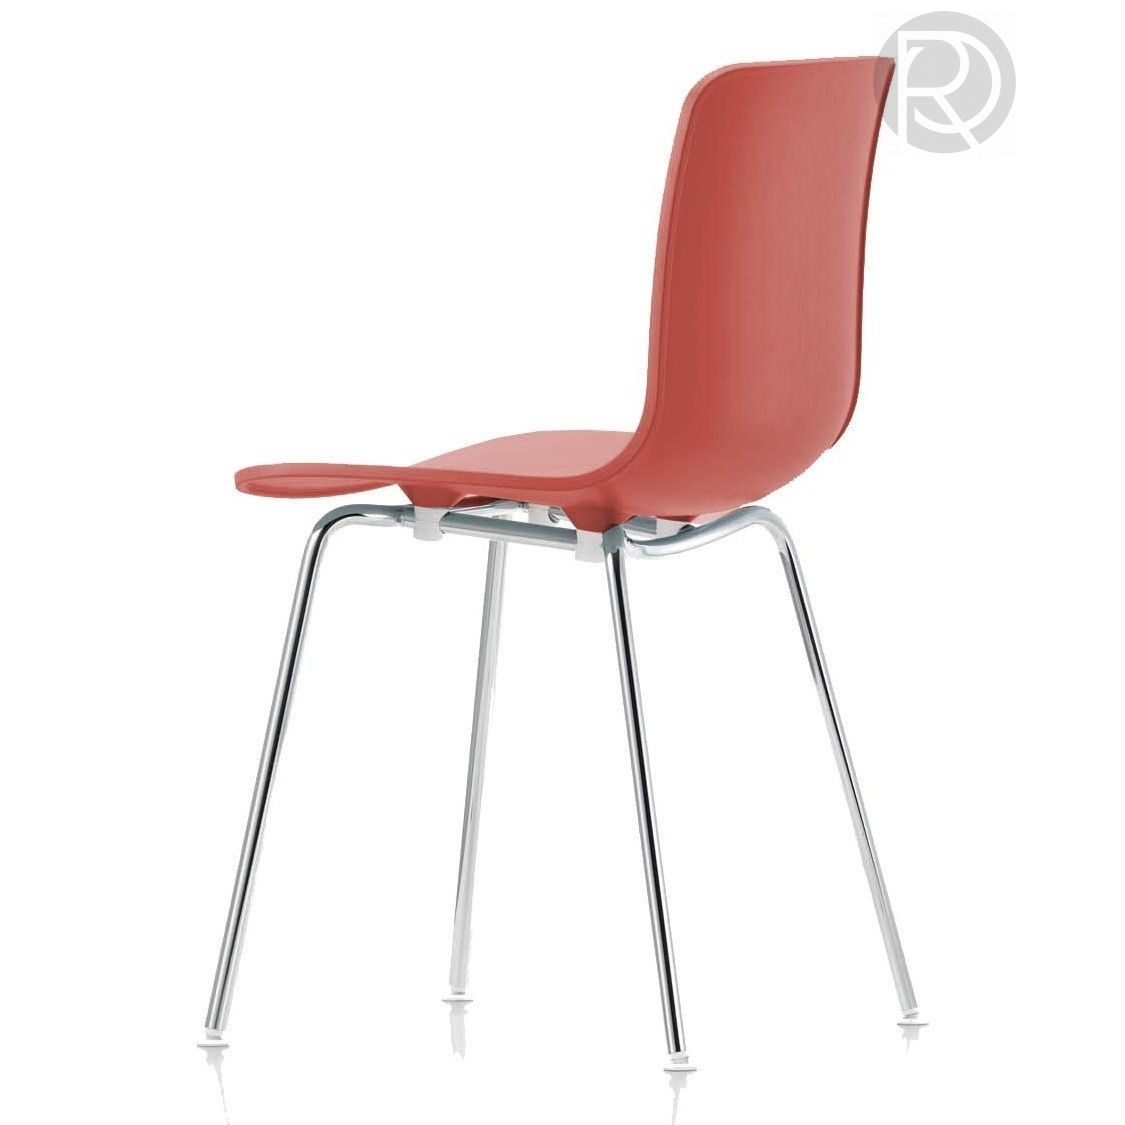 HAL TUBE chair by Vitra